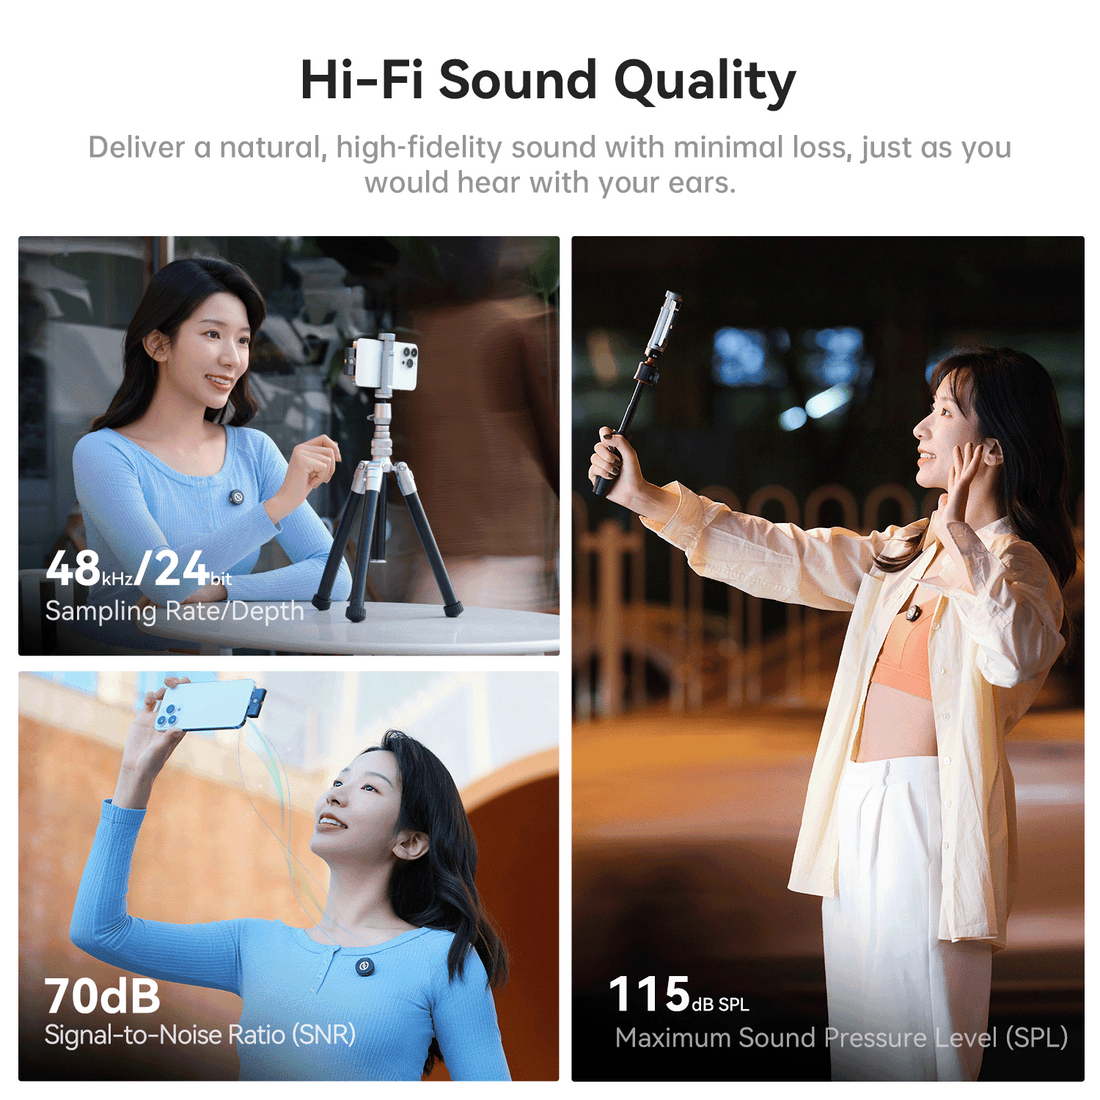 Hollyland Technology on X: Introducing the Hollyland 𝐋𝐀𝐑𝐊 𝐌𝟐: All in  One Button🎤 🎉 👉Learn More:  #NewProduct #LARKM2  #AllinOneButton #buttonmic #Hollyland #HollylandTech #Wireless #Microphone   / X